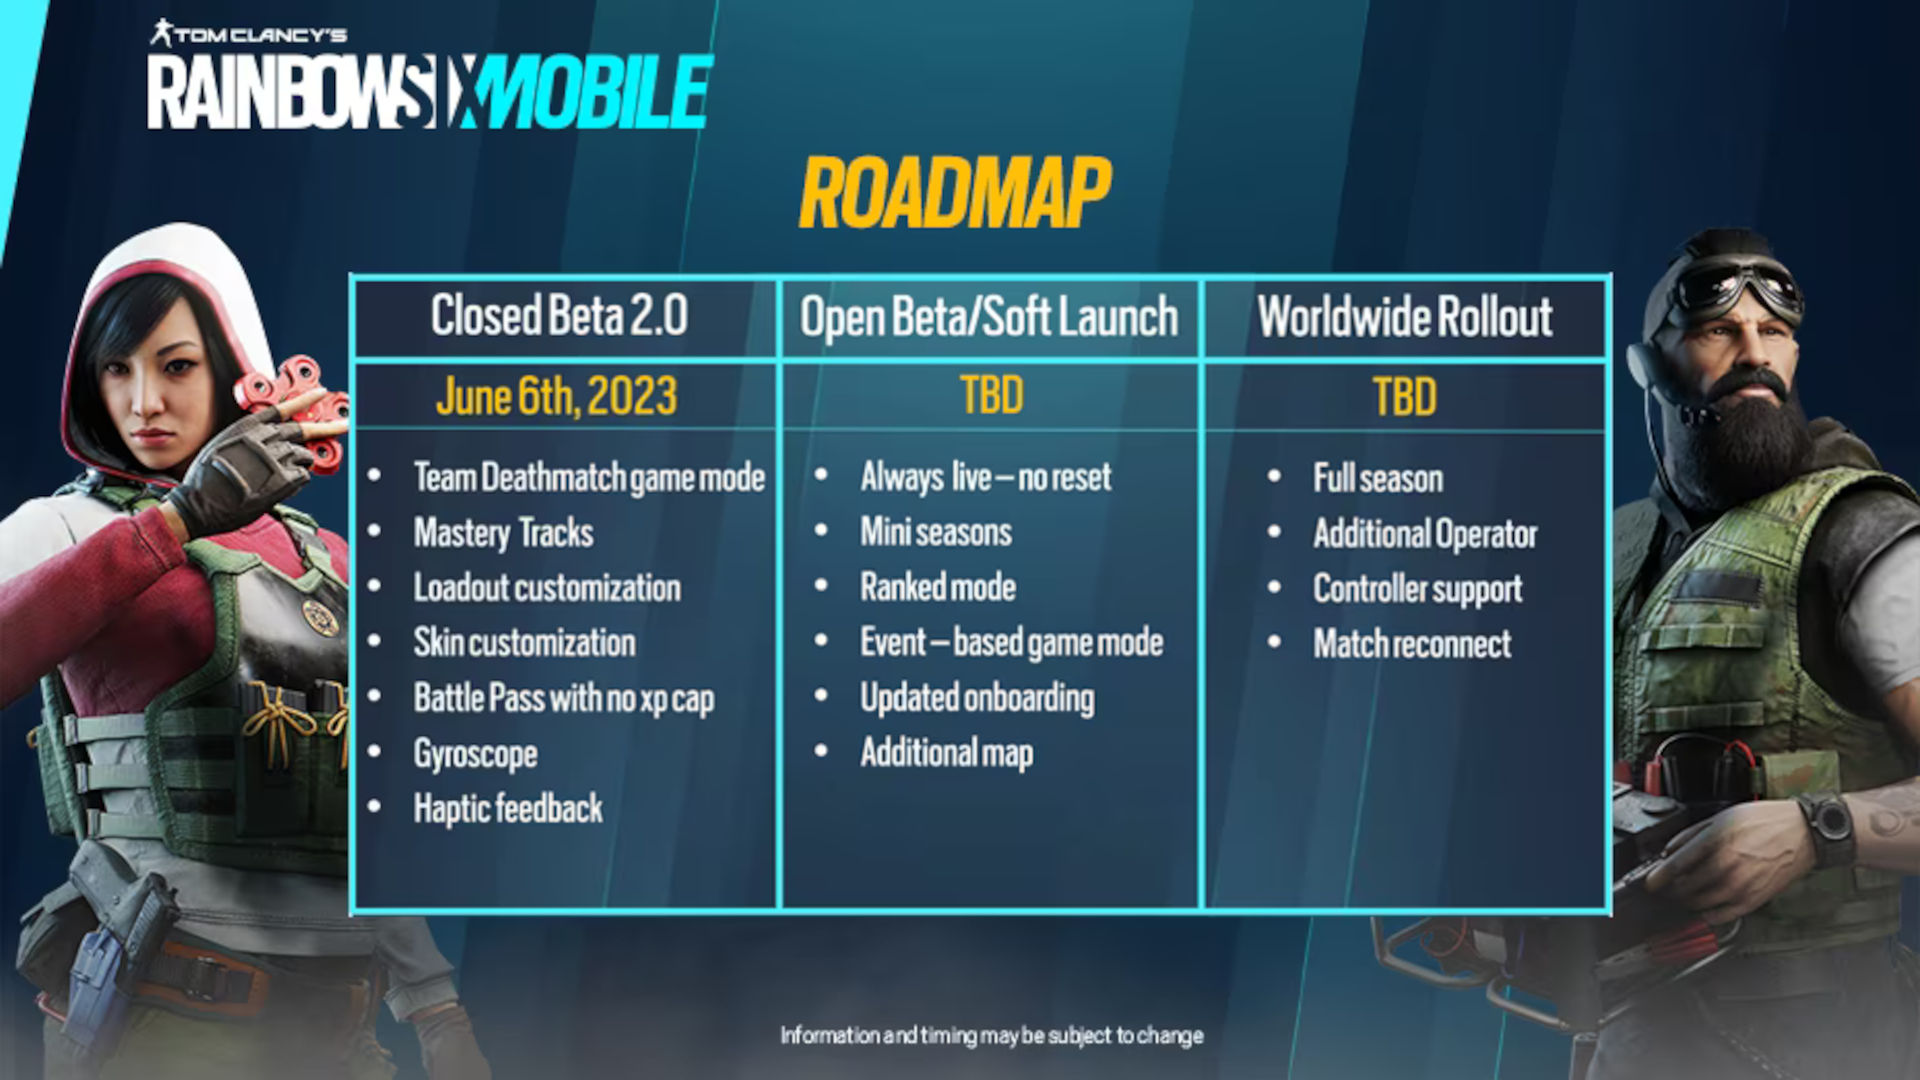 The Rainbow Six Mobile roadmap includes controller support at launch